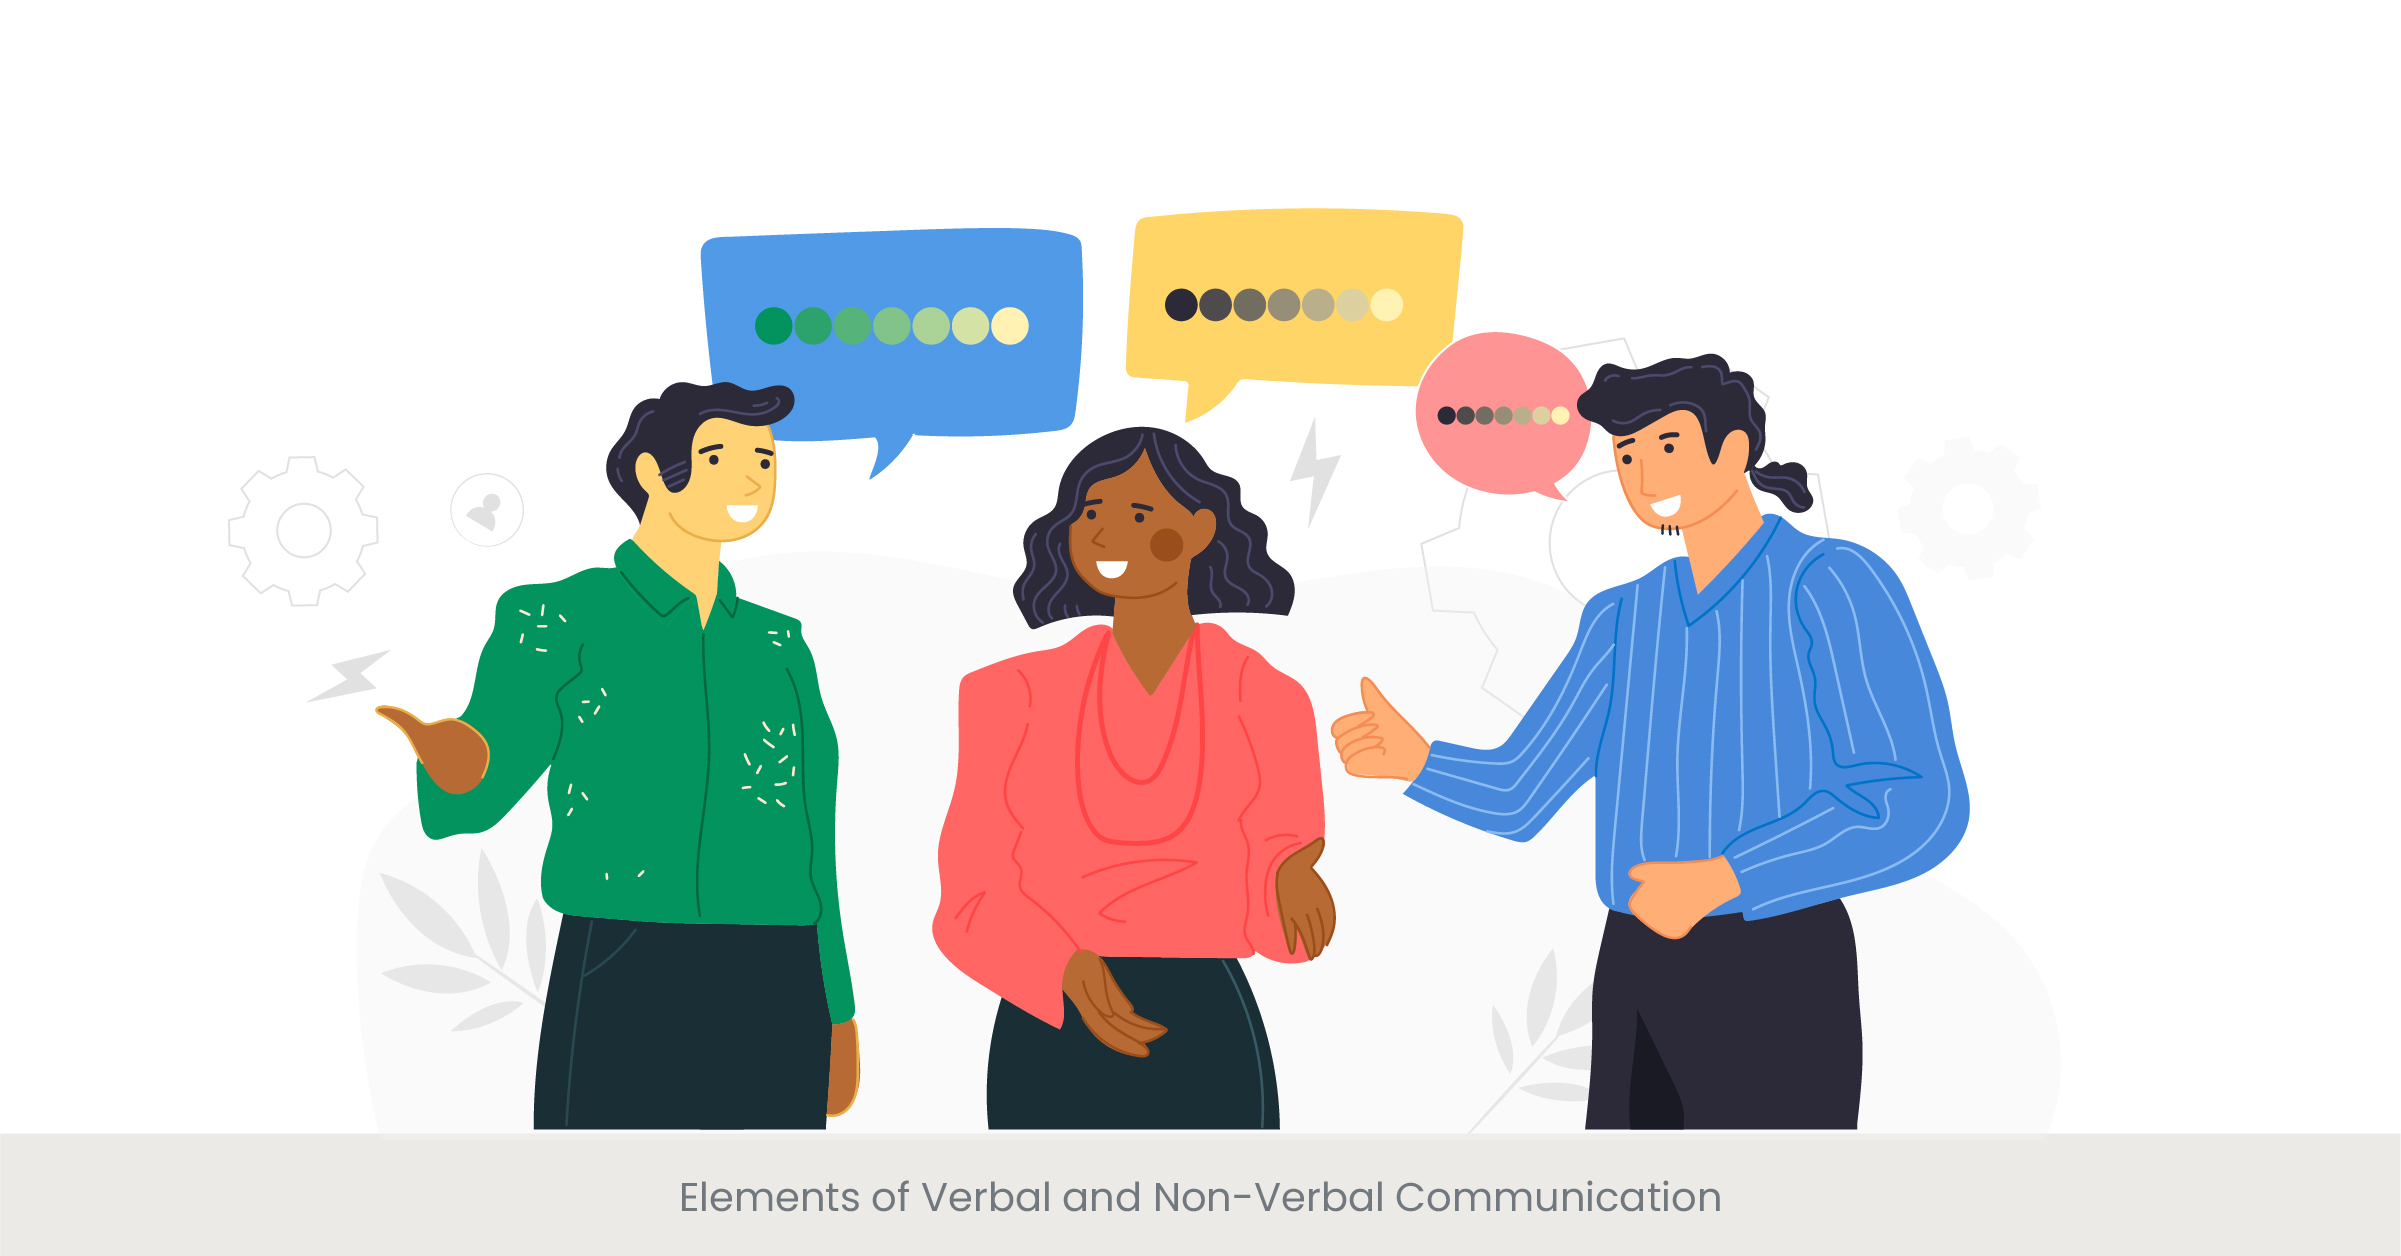 Elements of Verbal and Non-Verbal Communication